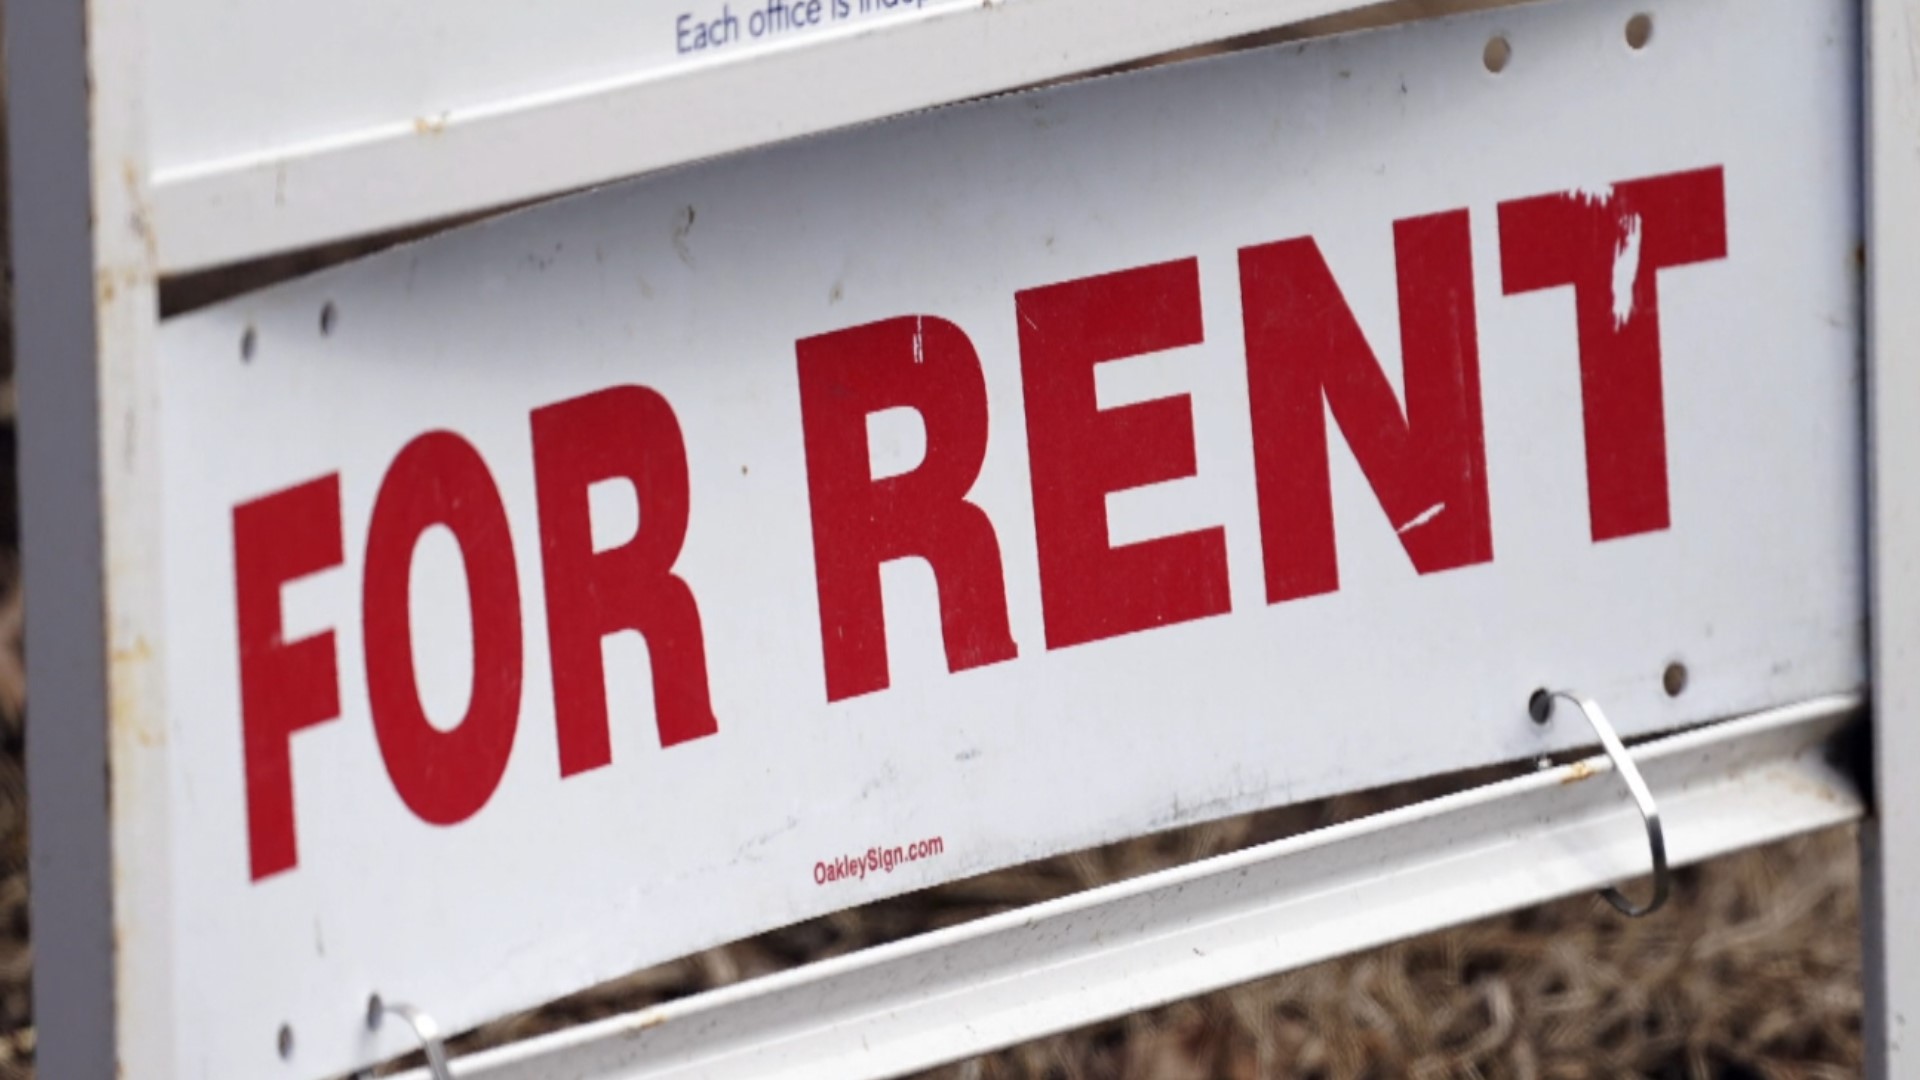 Lawmakers heard about a bill this afternoon that would require Marion County Landlords to fix issues they were cited for at a property before renting it out again.